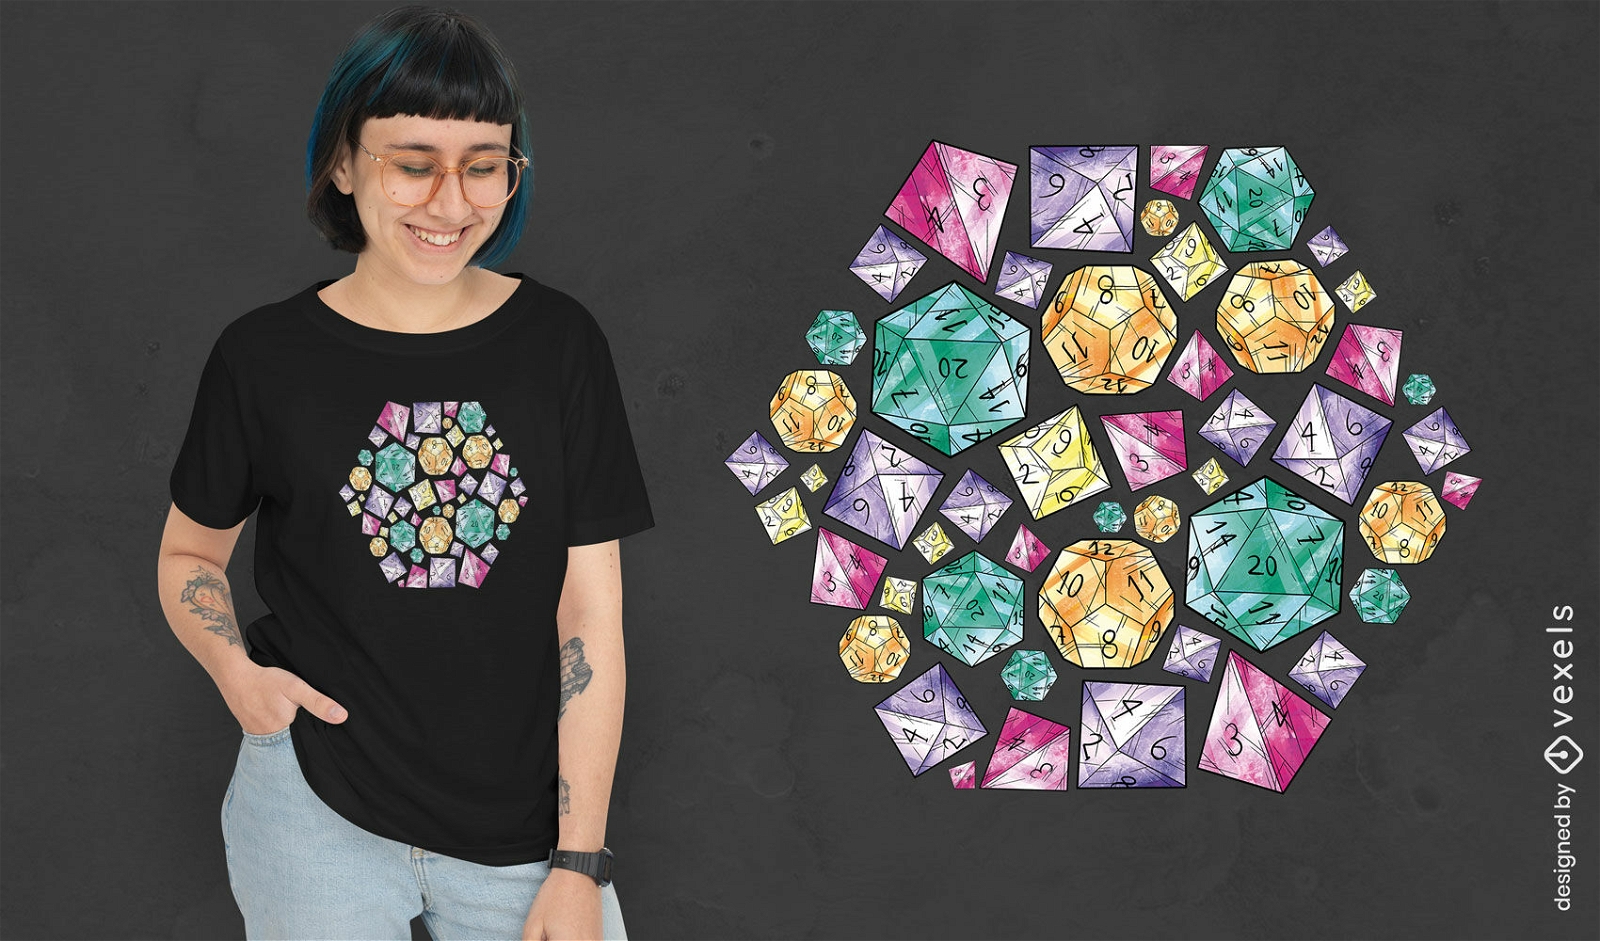 RPG dice collection t-shirt design